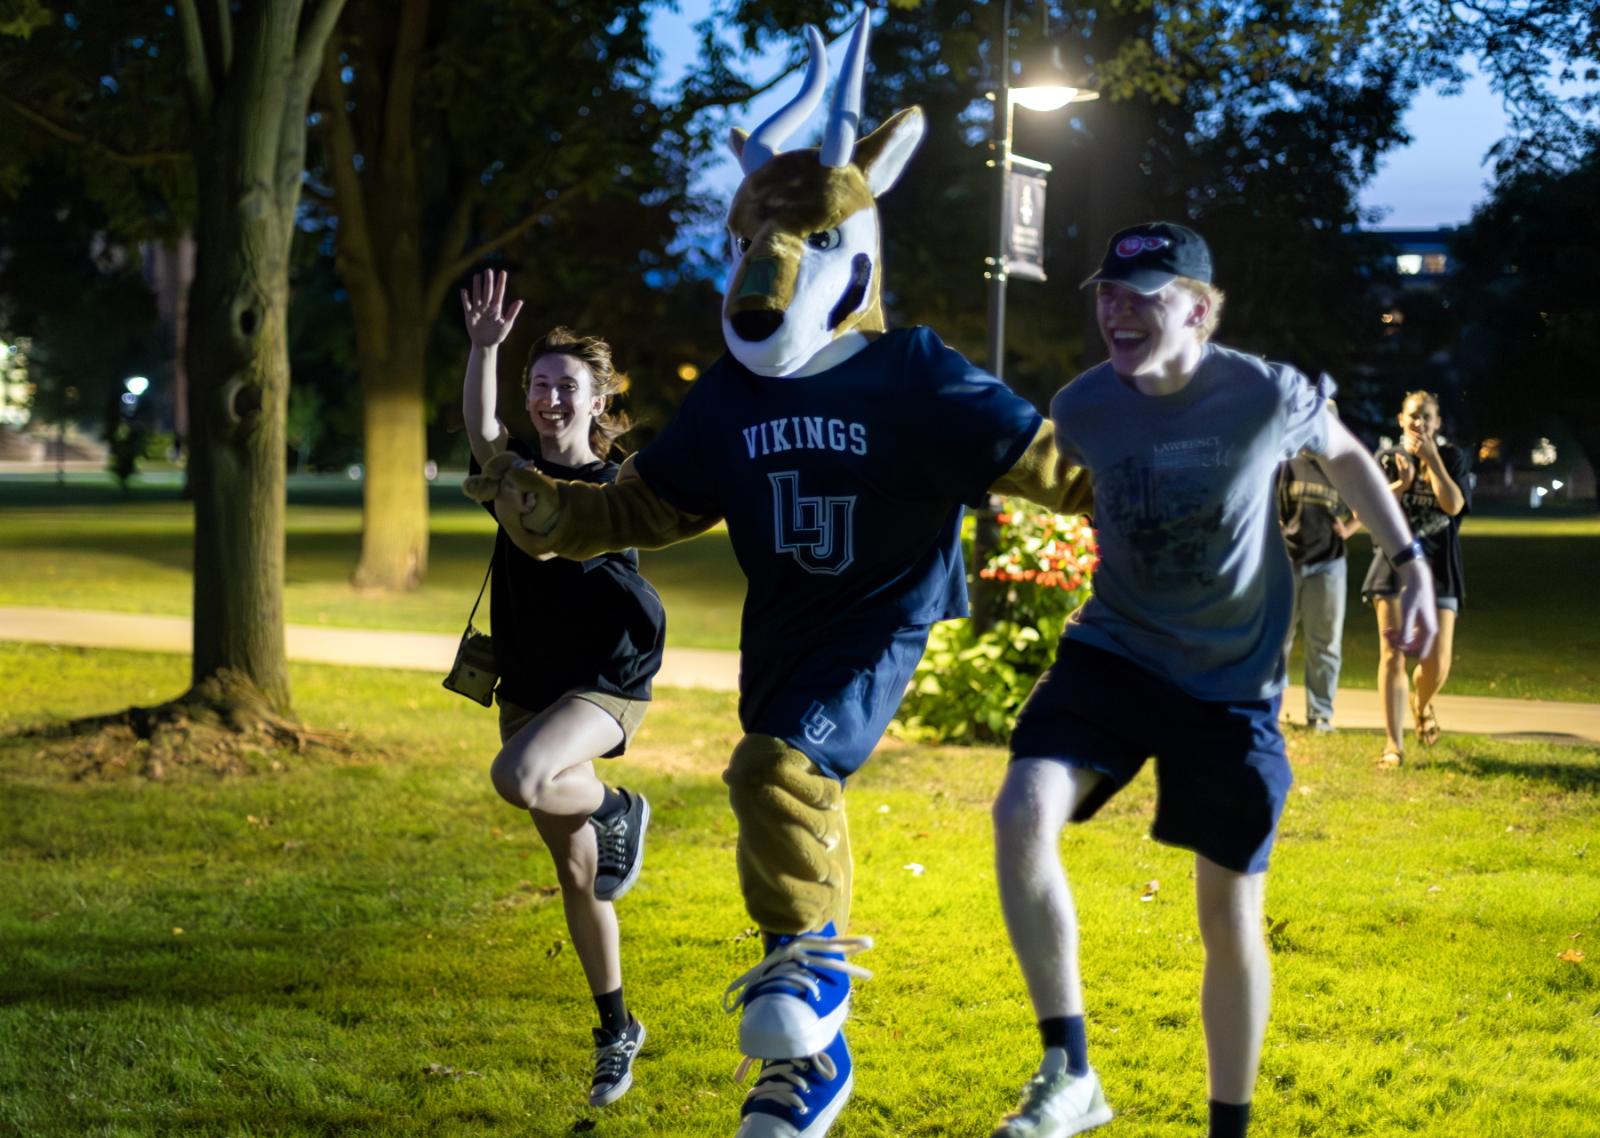 The mascot Blu joins two students at Blu's Bash on Main Hall Green.